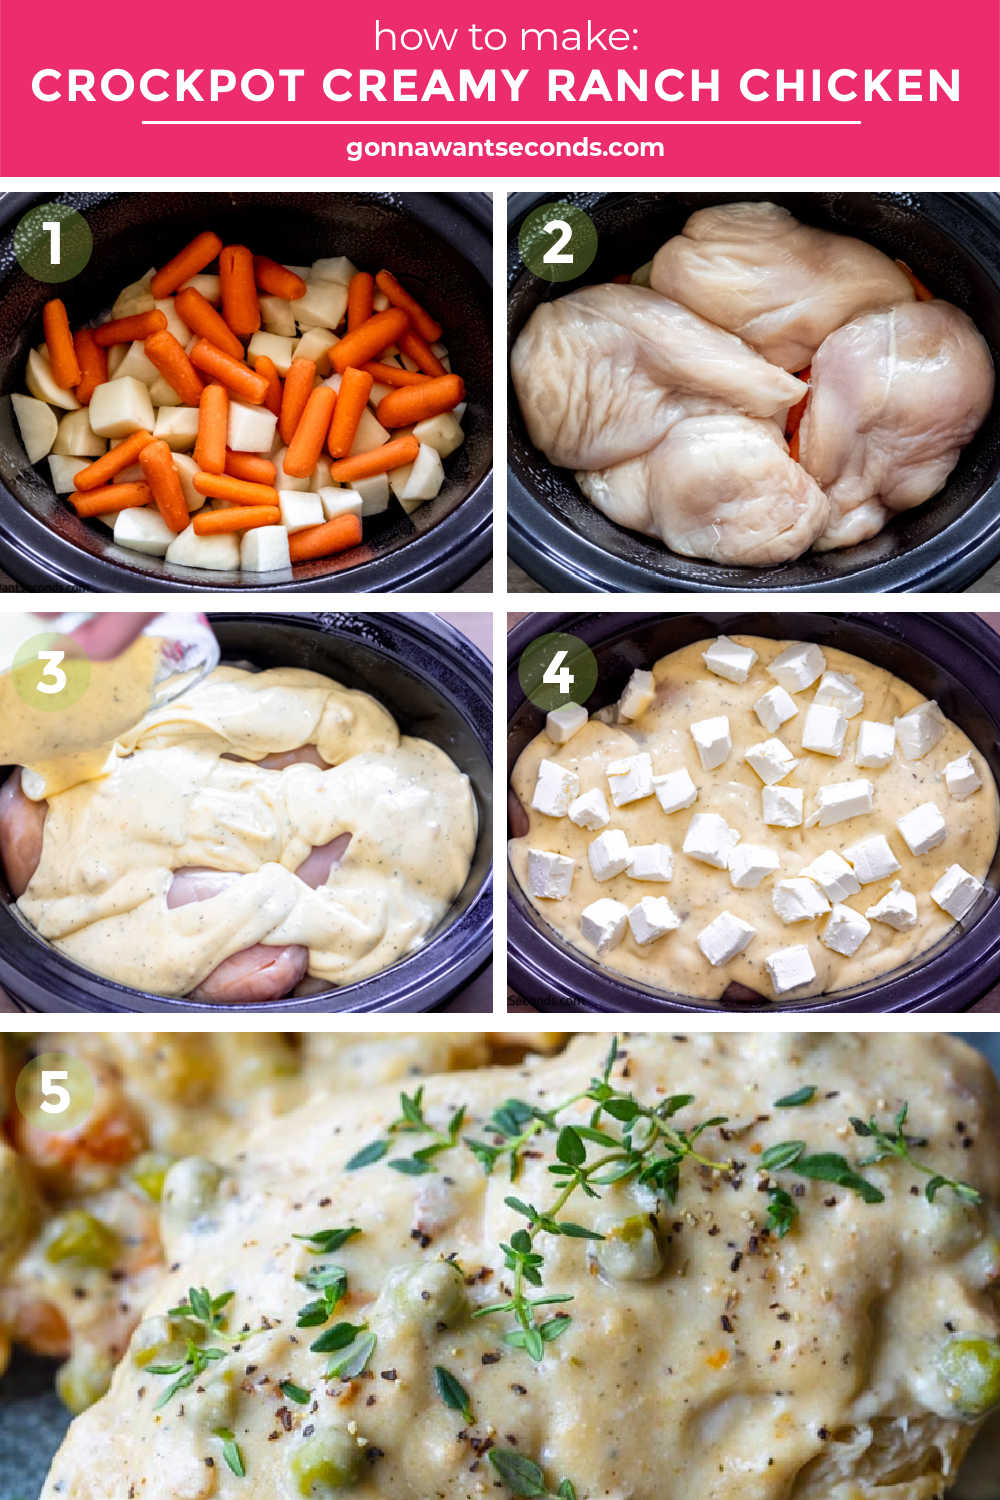 Step by step how to make crockpot creamy ranch chicken